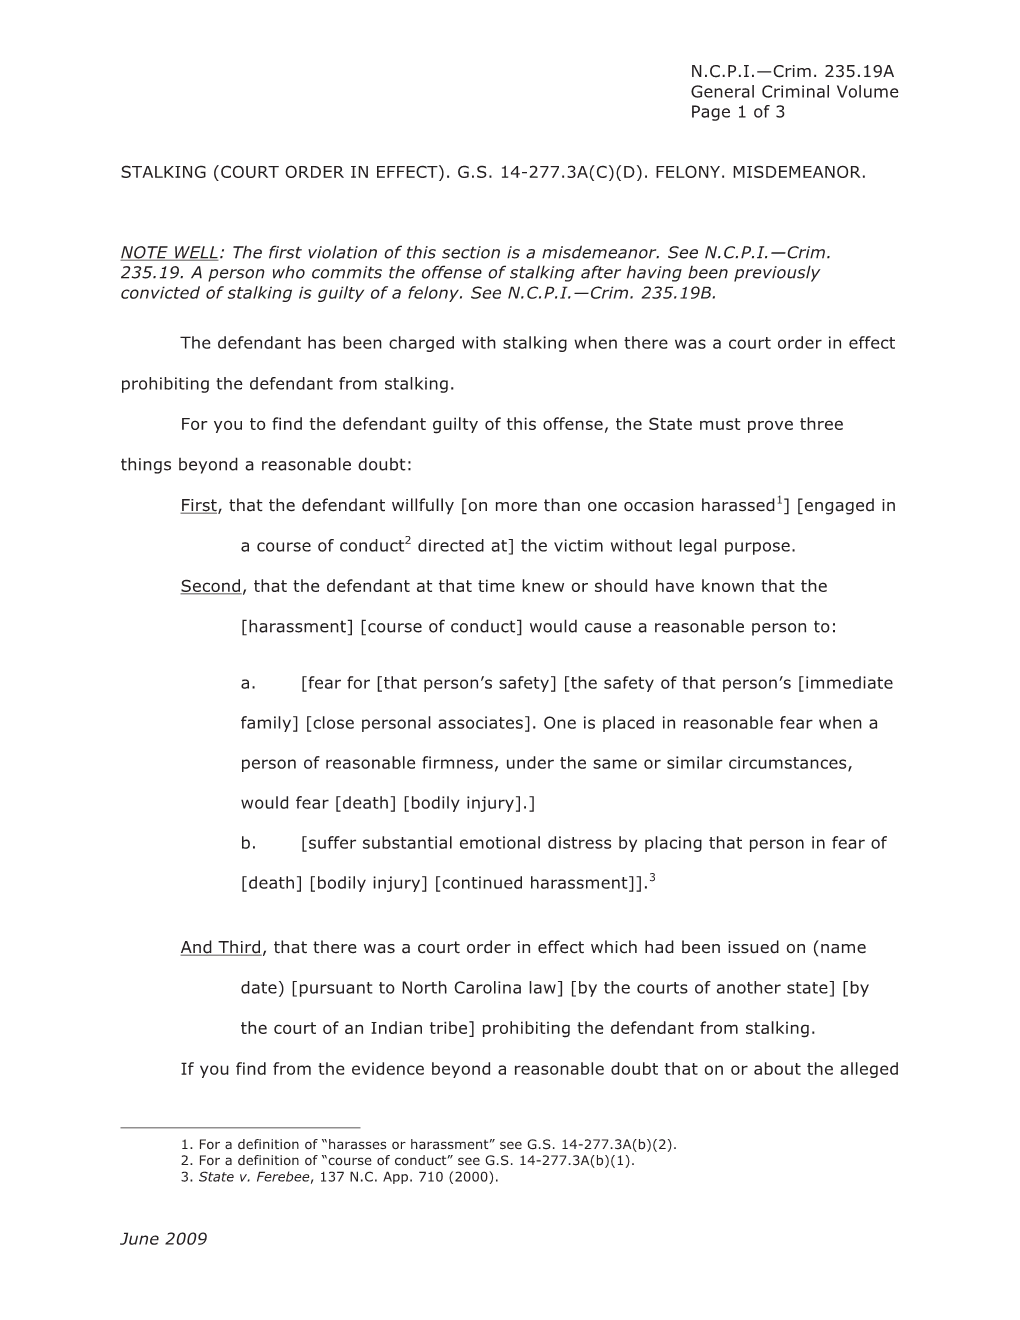 (Court Order in Effect). Gs 14-277.3A(C)(D). Felony